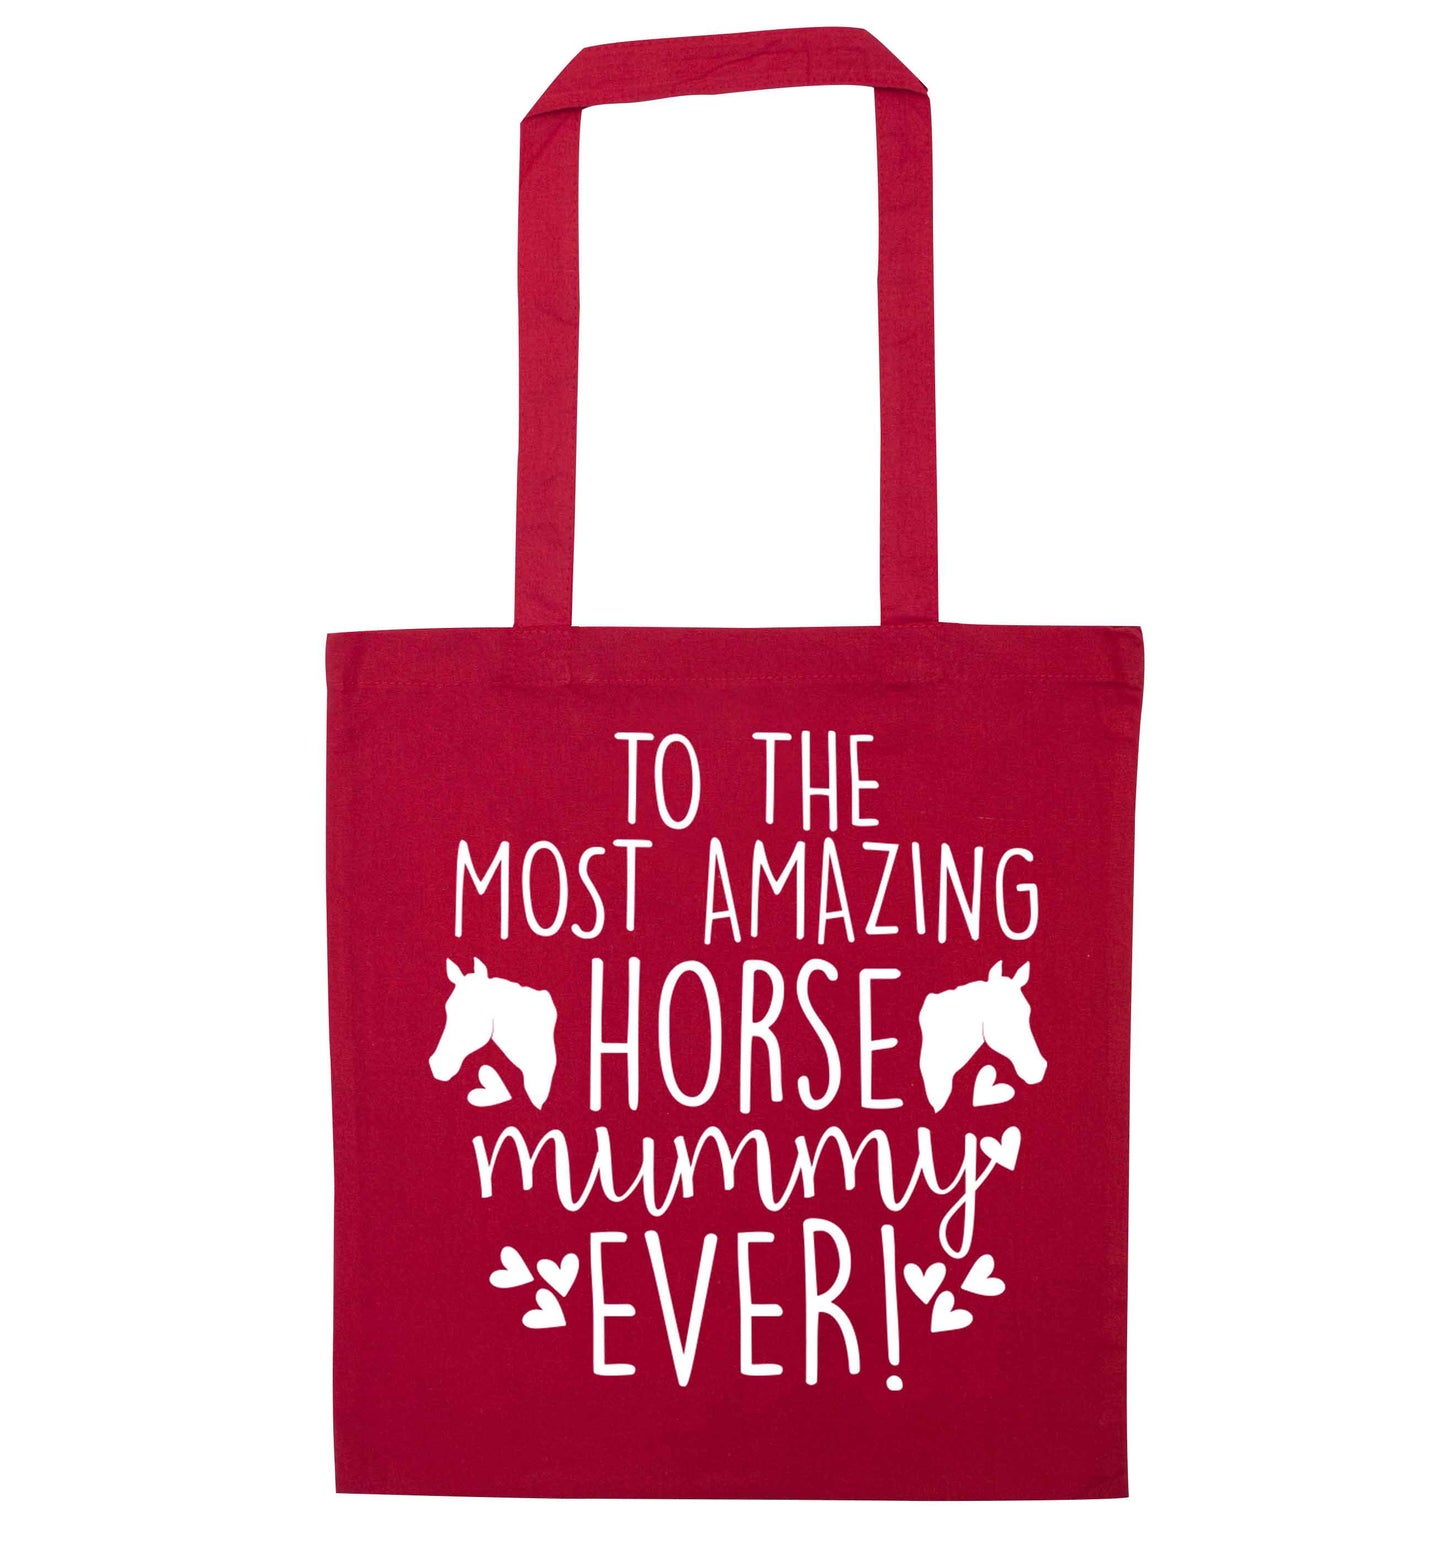 To the most amazing horse mummy ever! red tote bag